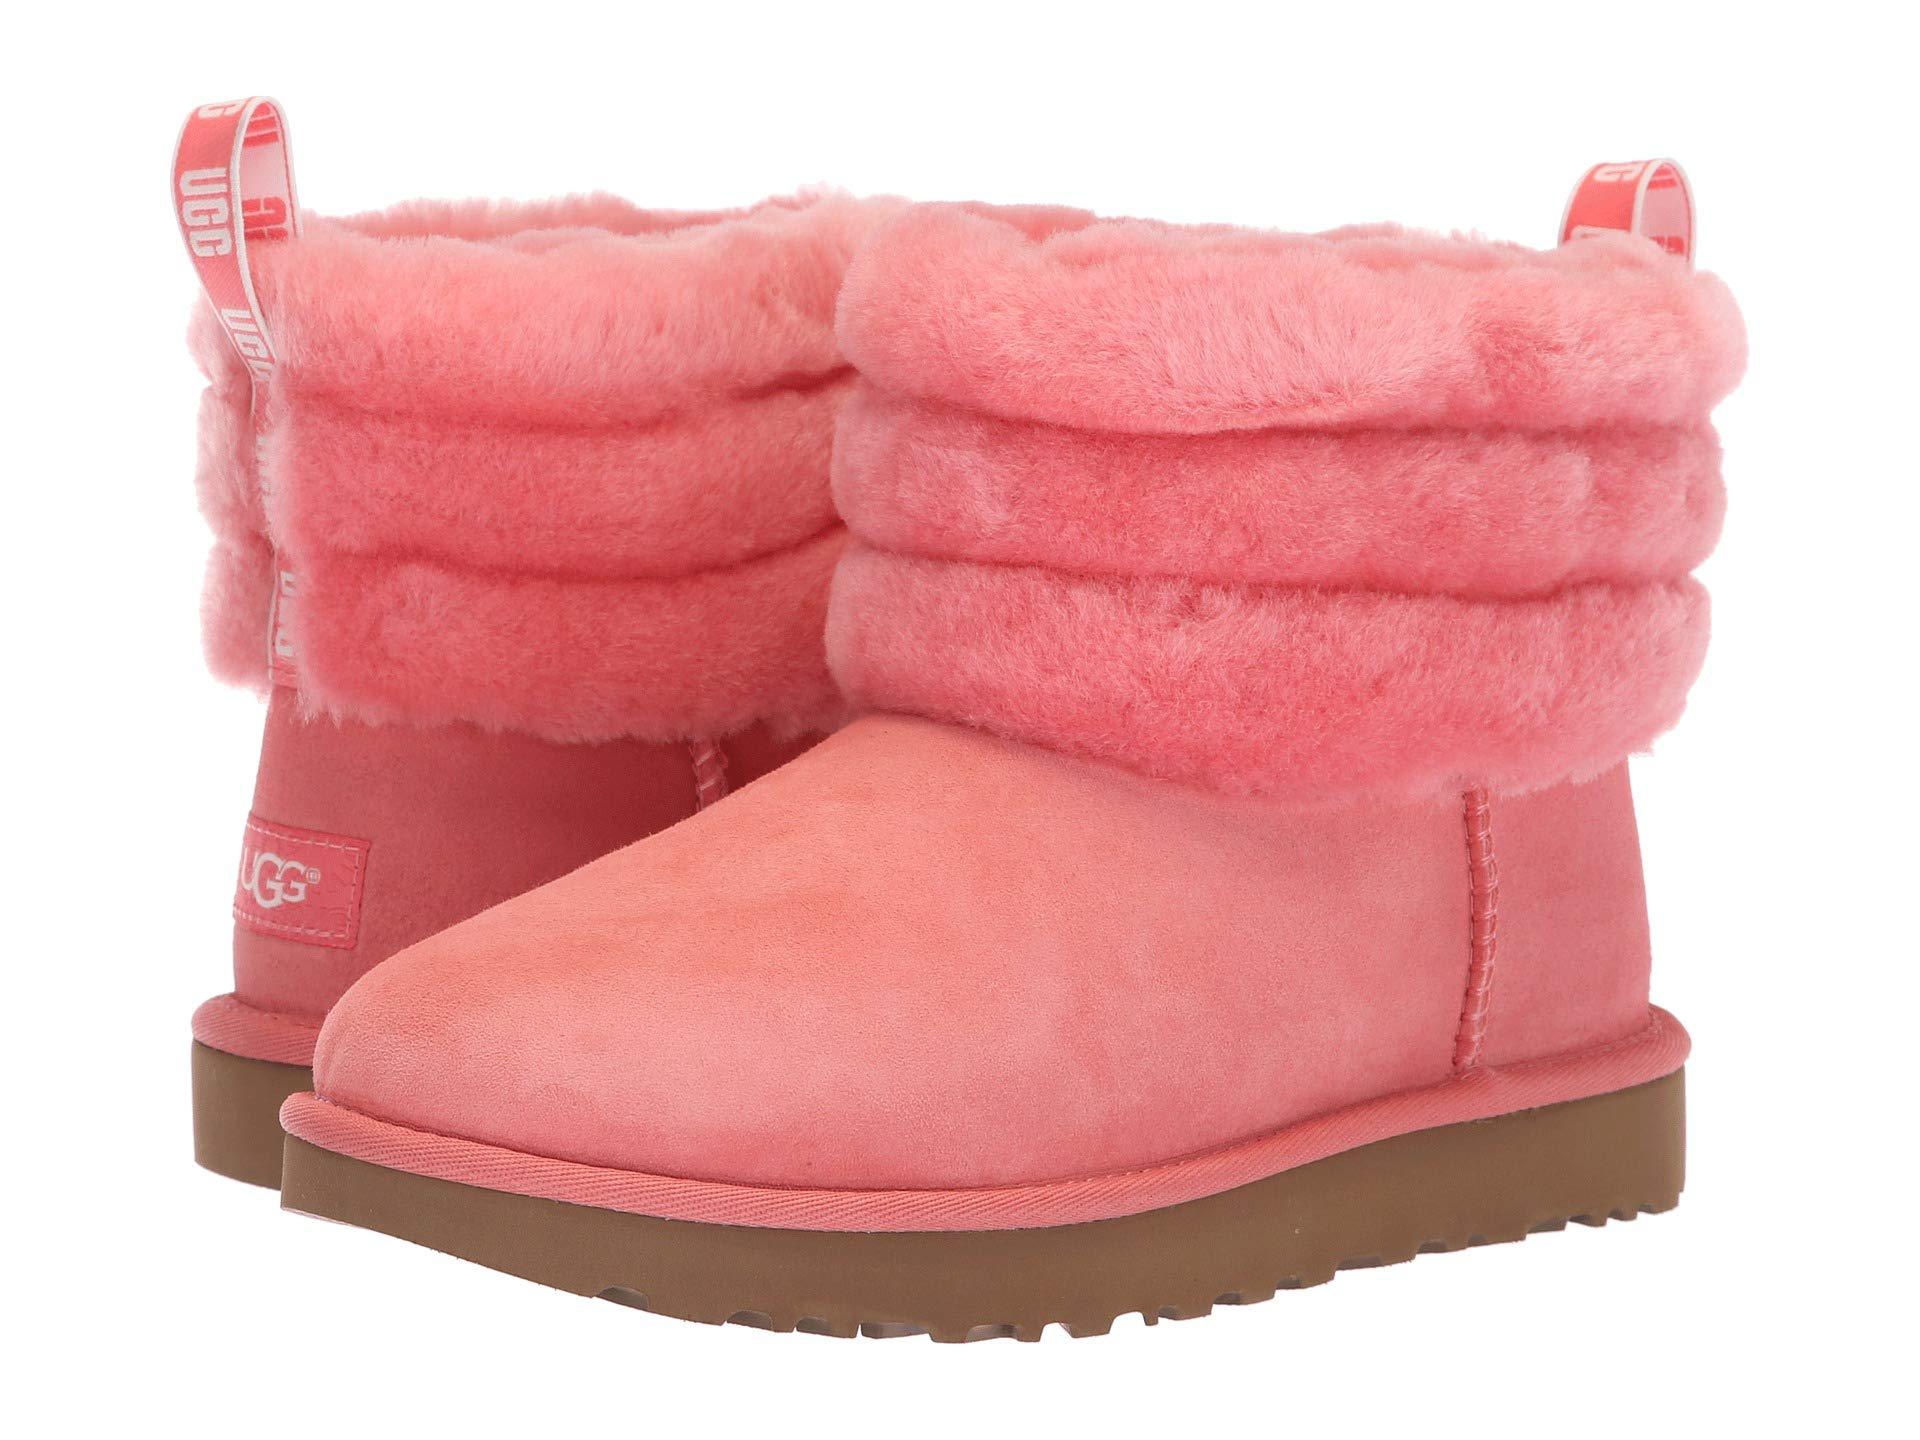 pale pink ugg boots